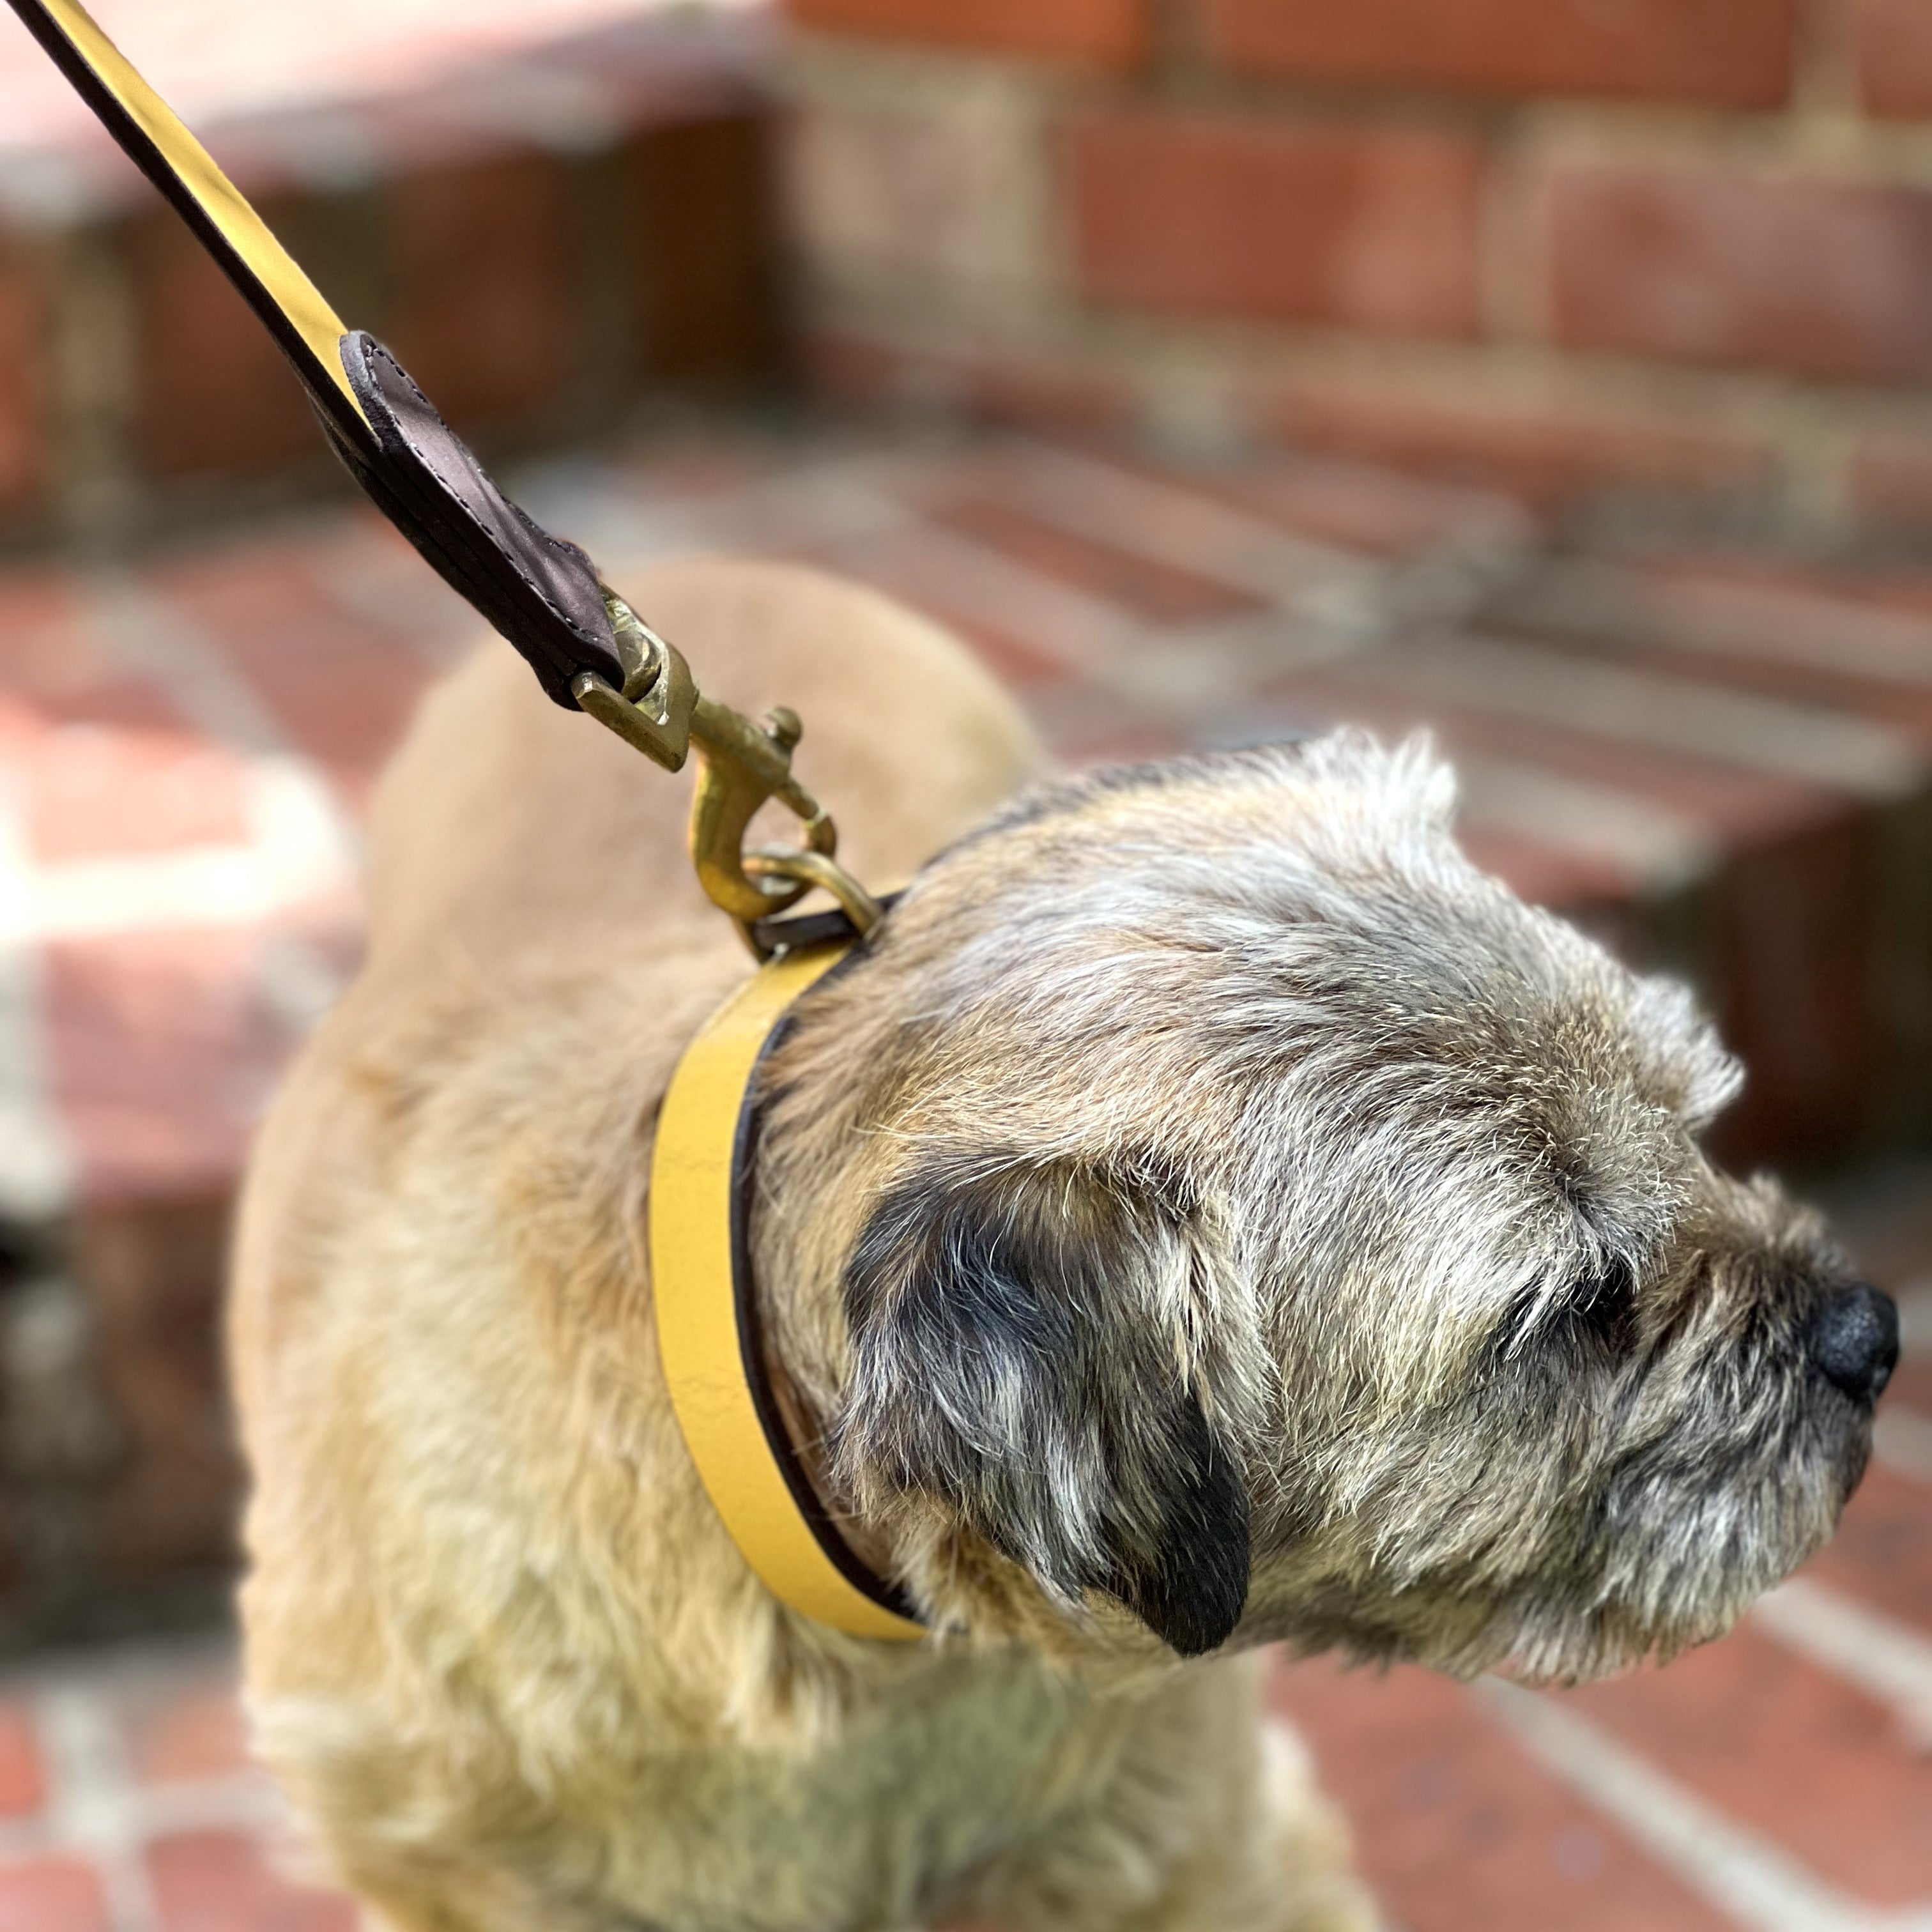 A serene dog with a golden-brown coat waits patiently on a brick patio, secured by a leash of durable Georgie Paws Buffalo Leather Cooper Lead - wheat with a brass clip, evoking a sense of calm companionship and readiness for